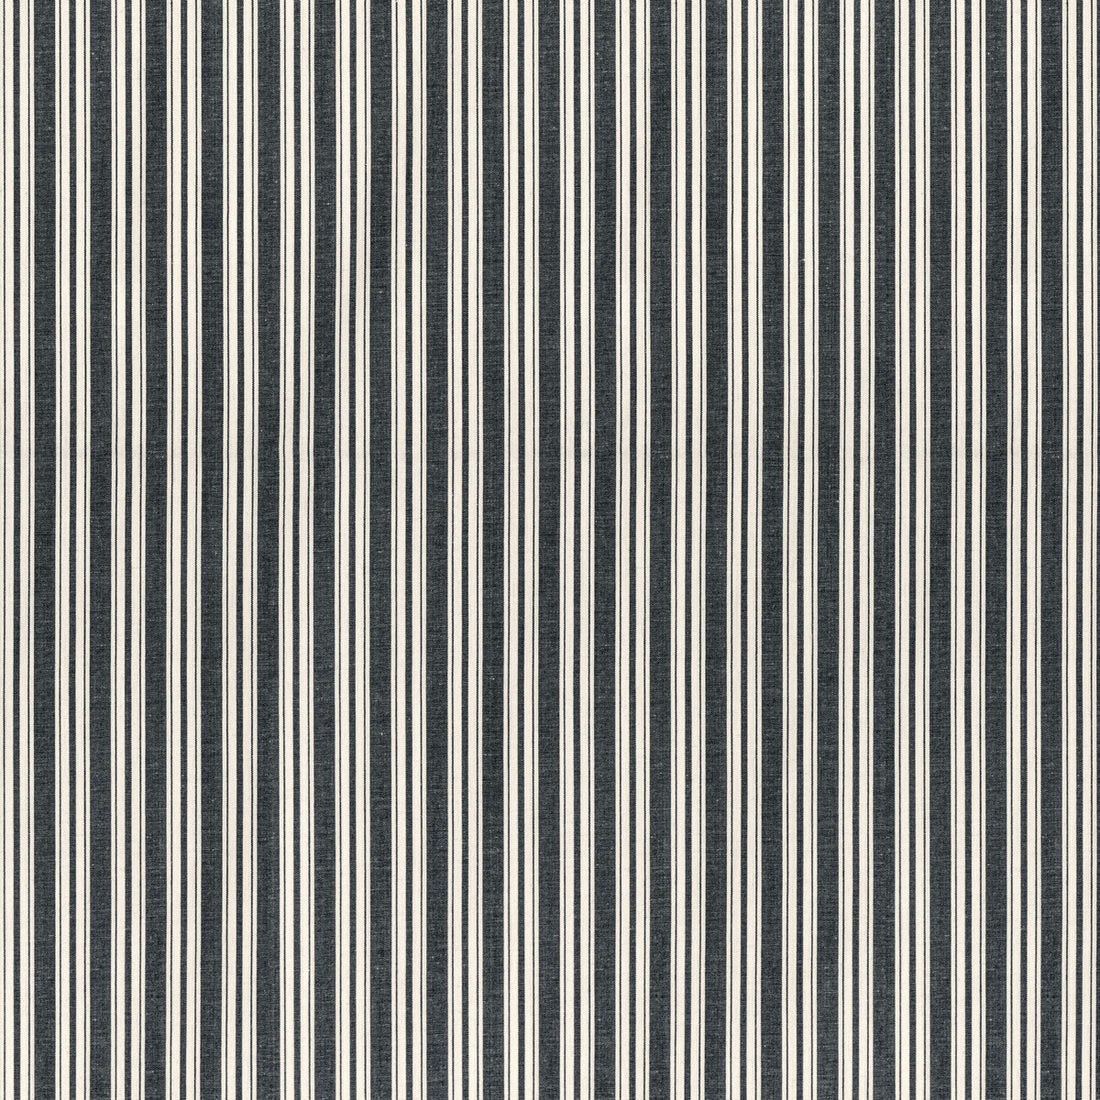 Selune Stripe fabric in noir color - pattern 8022118.8.0 - by Brunschwig &amp; Fils in the Normant Checks And Stripes II collection